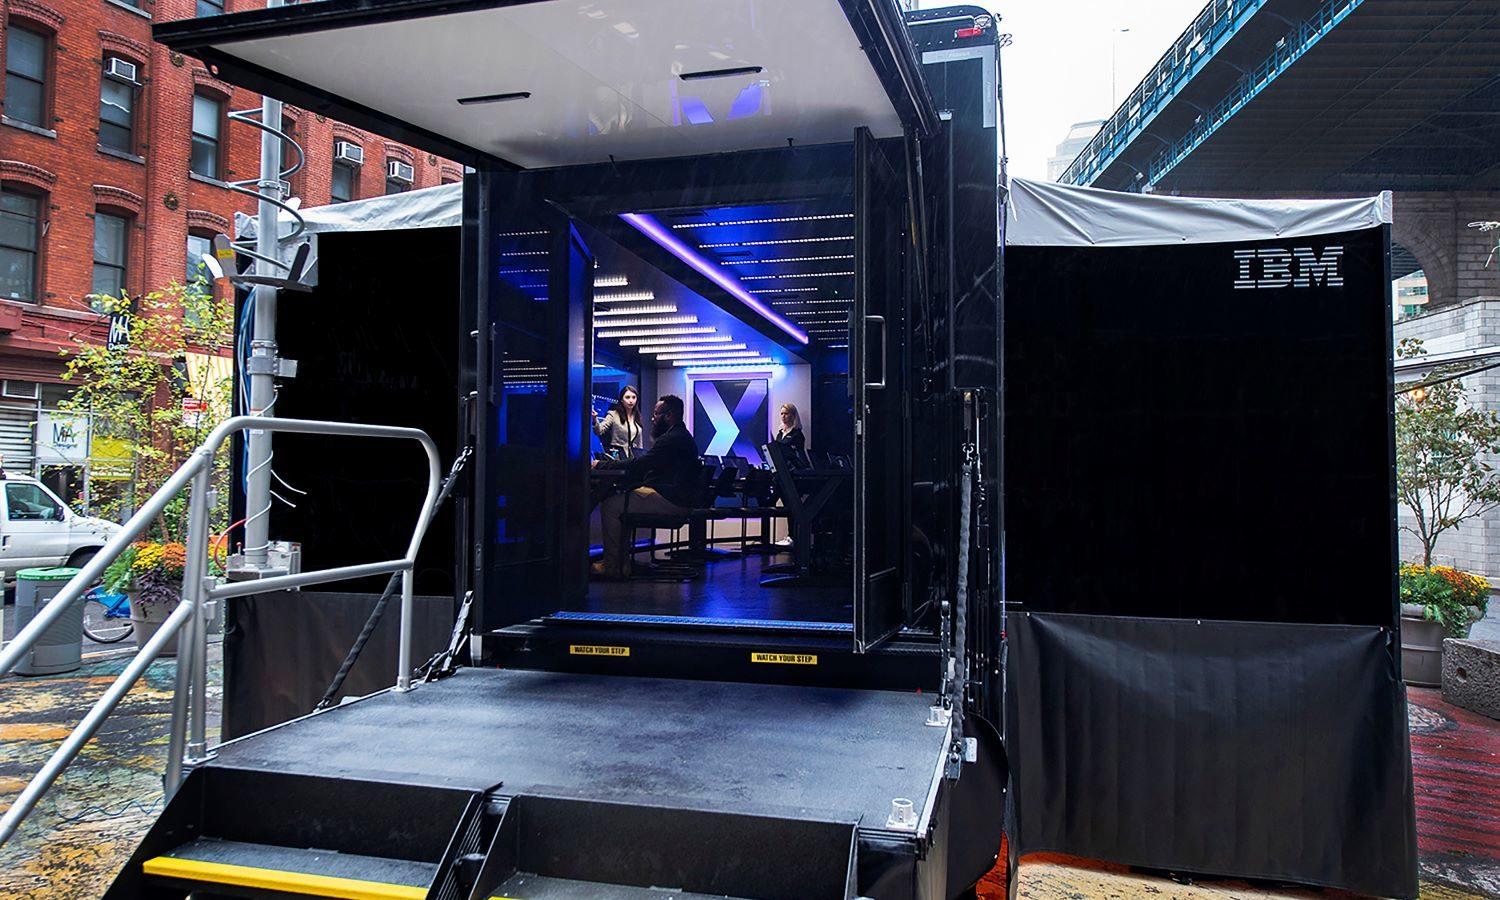 IBM demonstrates the capabilities of the industry’s first Security Operation Center on wheels in 2018. The IBM X-Force Command Cyber Tactical Operations Center (C-TOC) can travel onsite for cybersecurity training, education and response, including immersive cyberattack simulations to help organizations improve their incident response efforts. (Jon ...